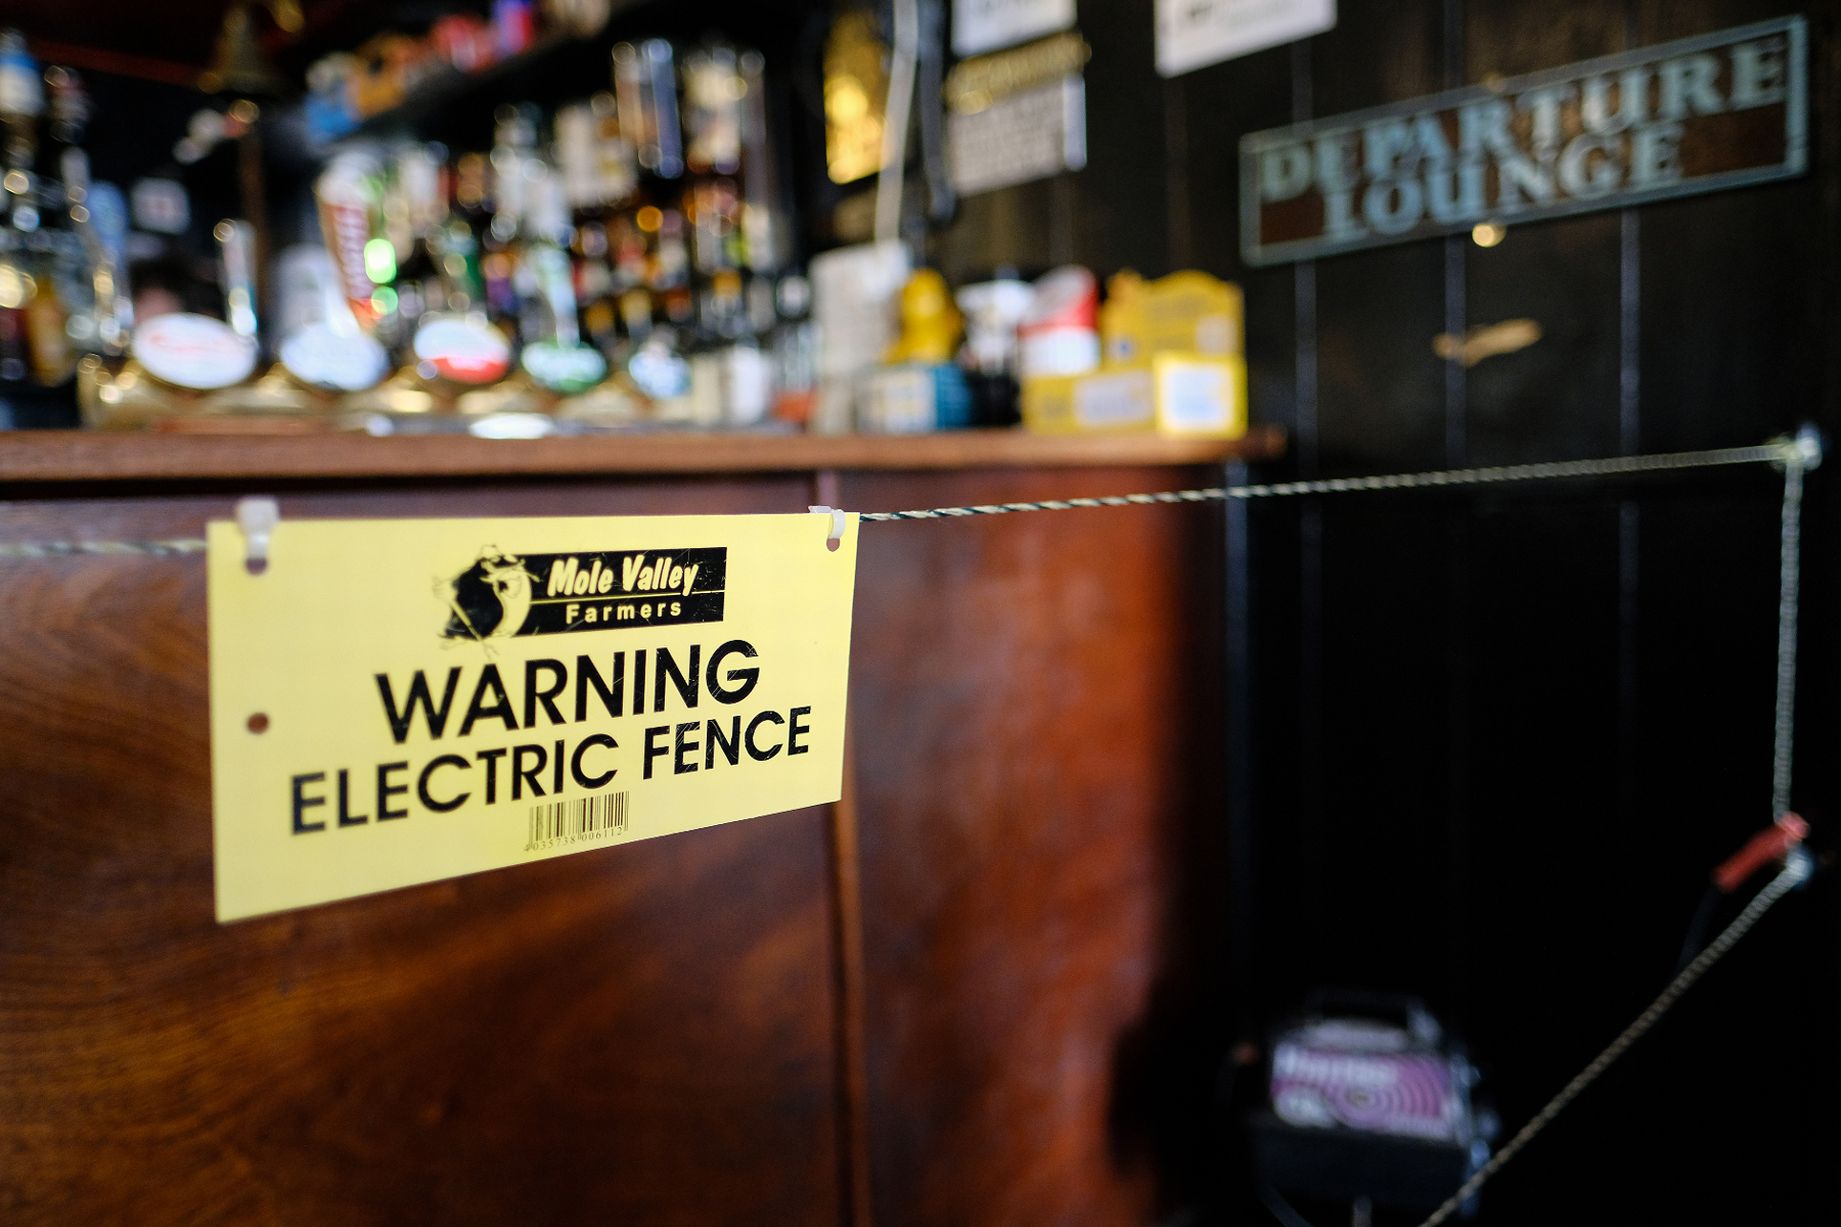 Pub owner in England installs electric fence to keep patrons from getting too close